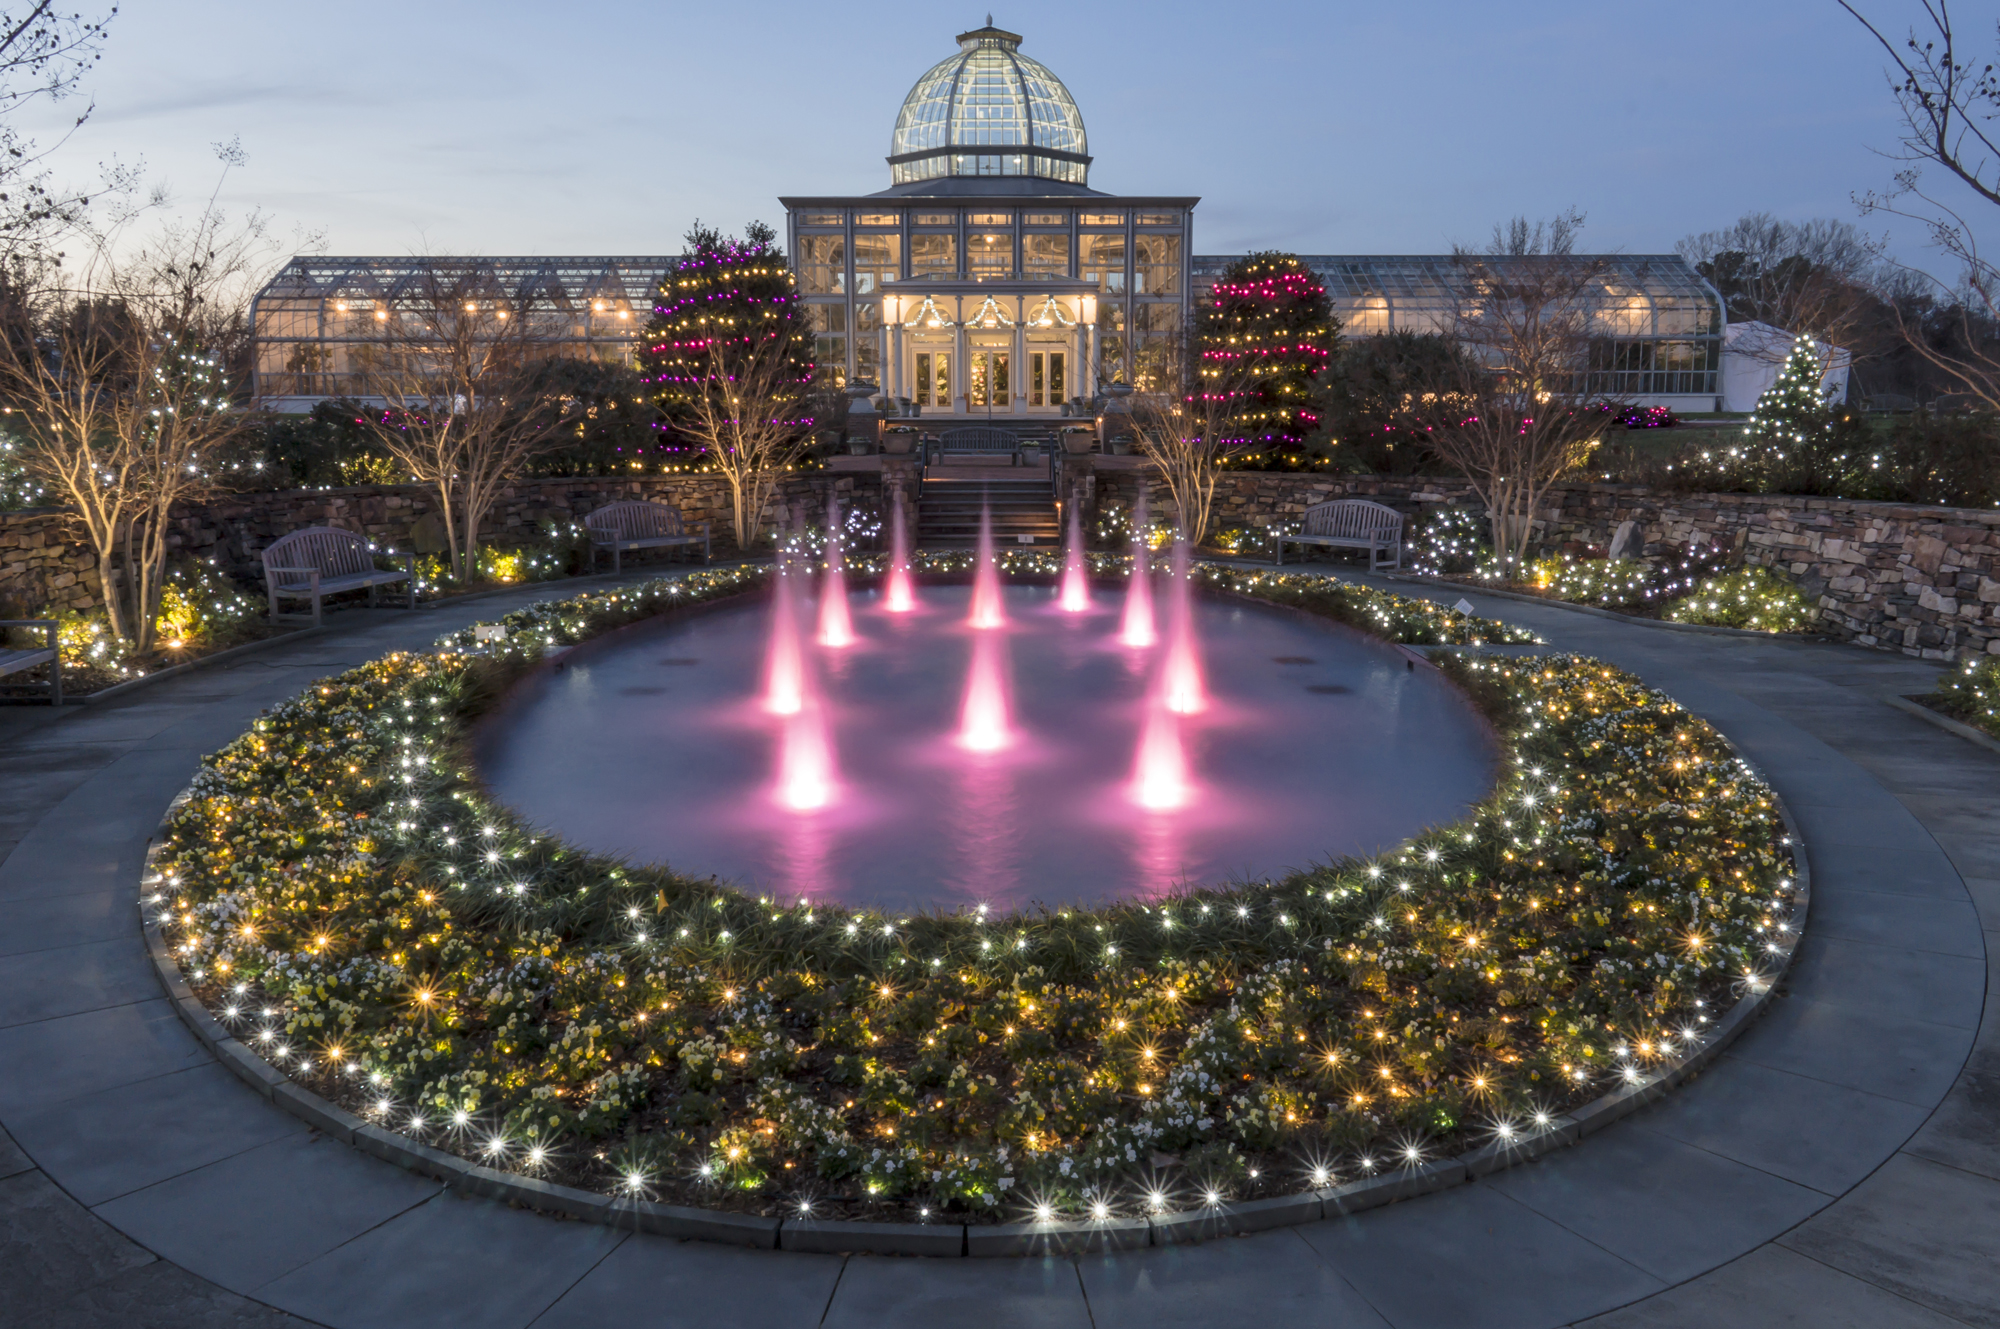 Completely Kids Richmond :: GardenFest of Lights at Lewis Ginter